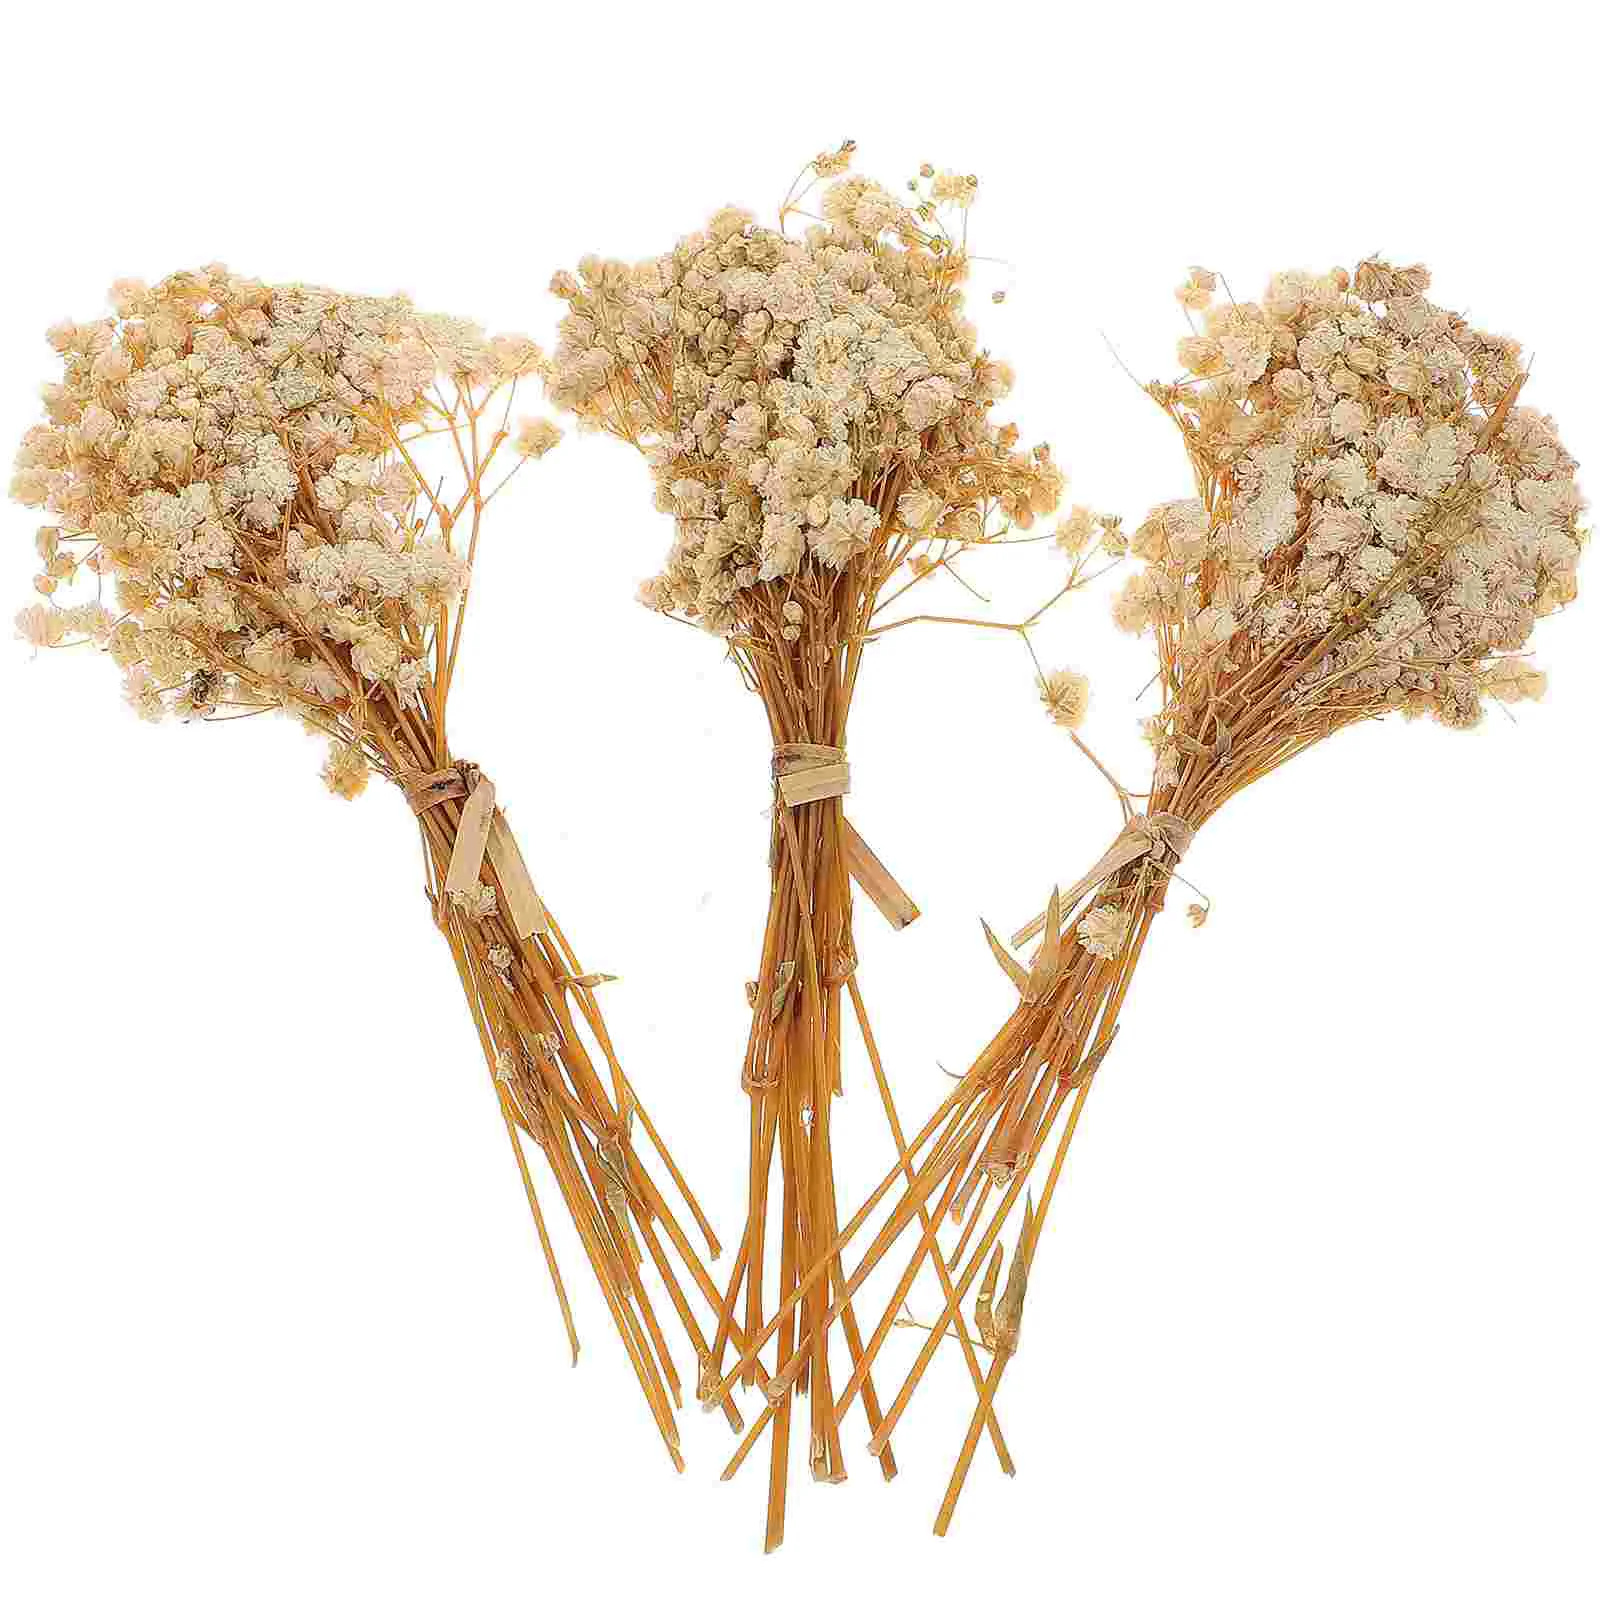 

Dried Flowers Flower Babysbreath Breath Bouquet Babys Branches Gypsophila Vase Stems Permanent Decor Natural Baby Dry Artificial